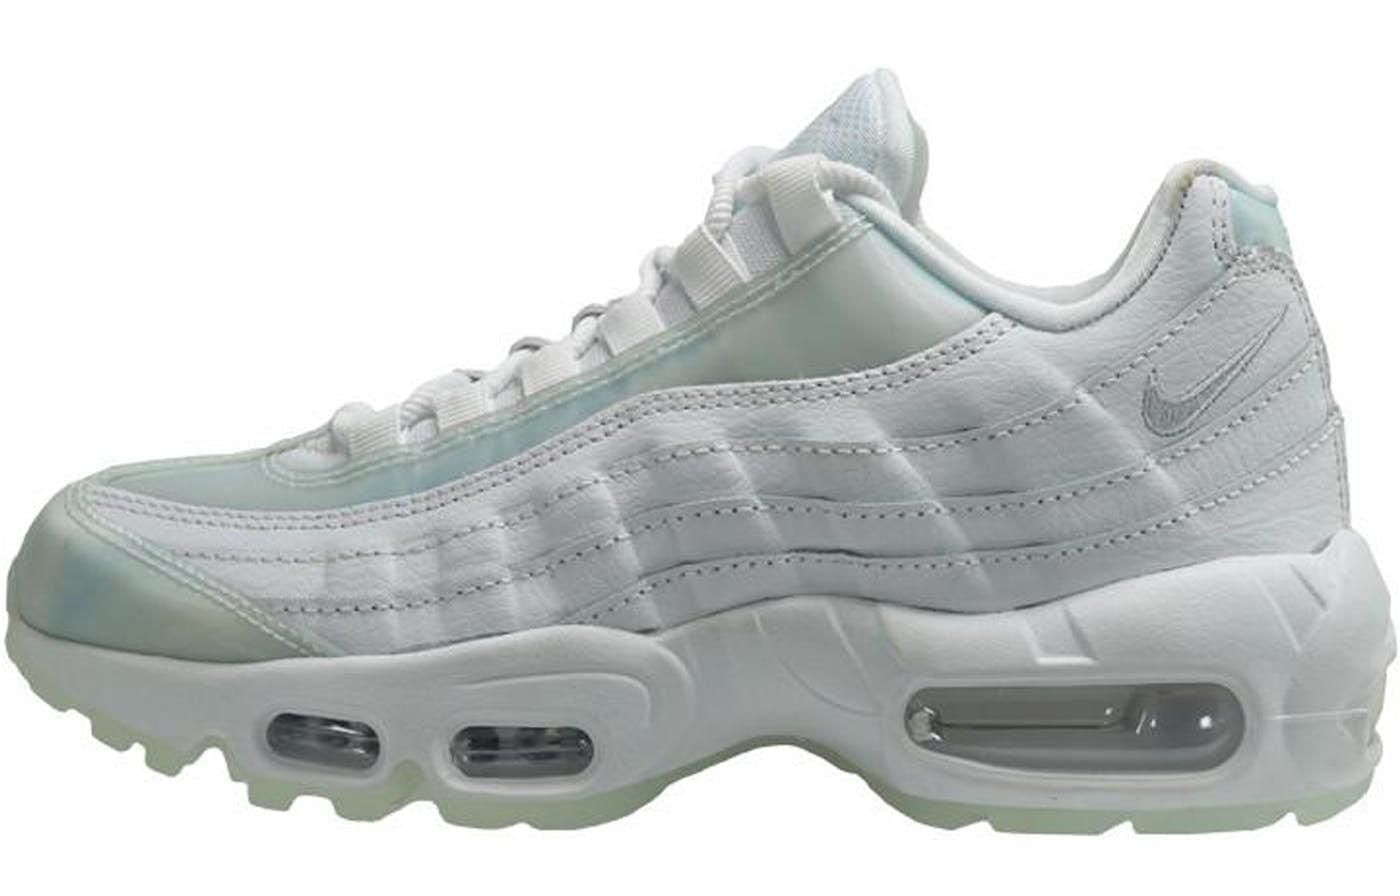 Nike Womens Air Max 95 SE 'White Ice' White/Pure Platinum-Ice 918413-100 sneakmarks